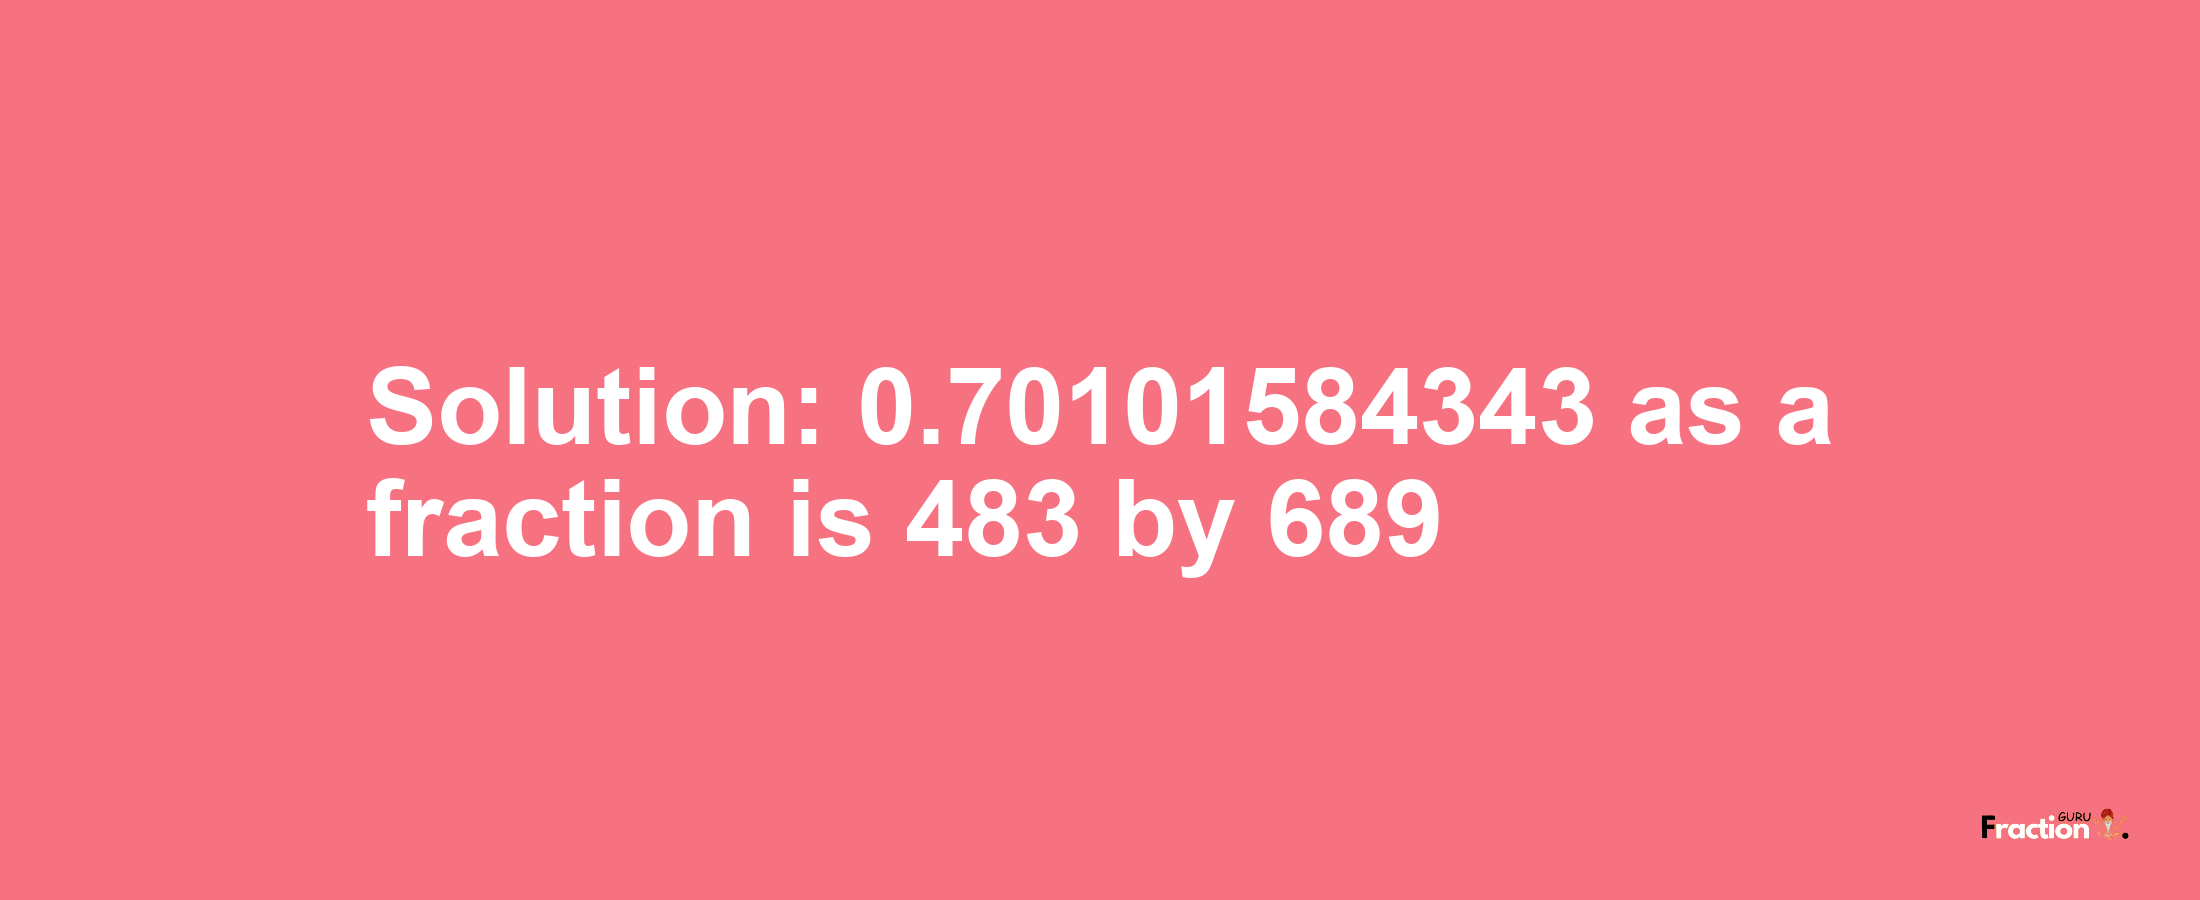 Solution:0.70101584343 as a fraction is 483/689